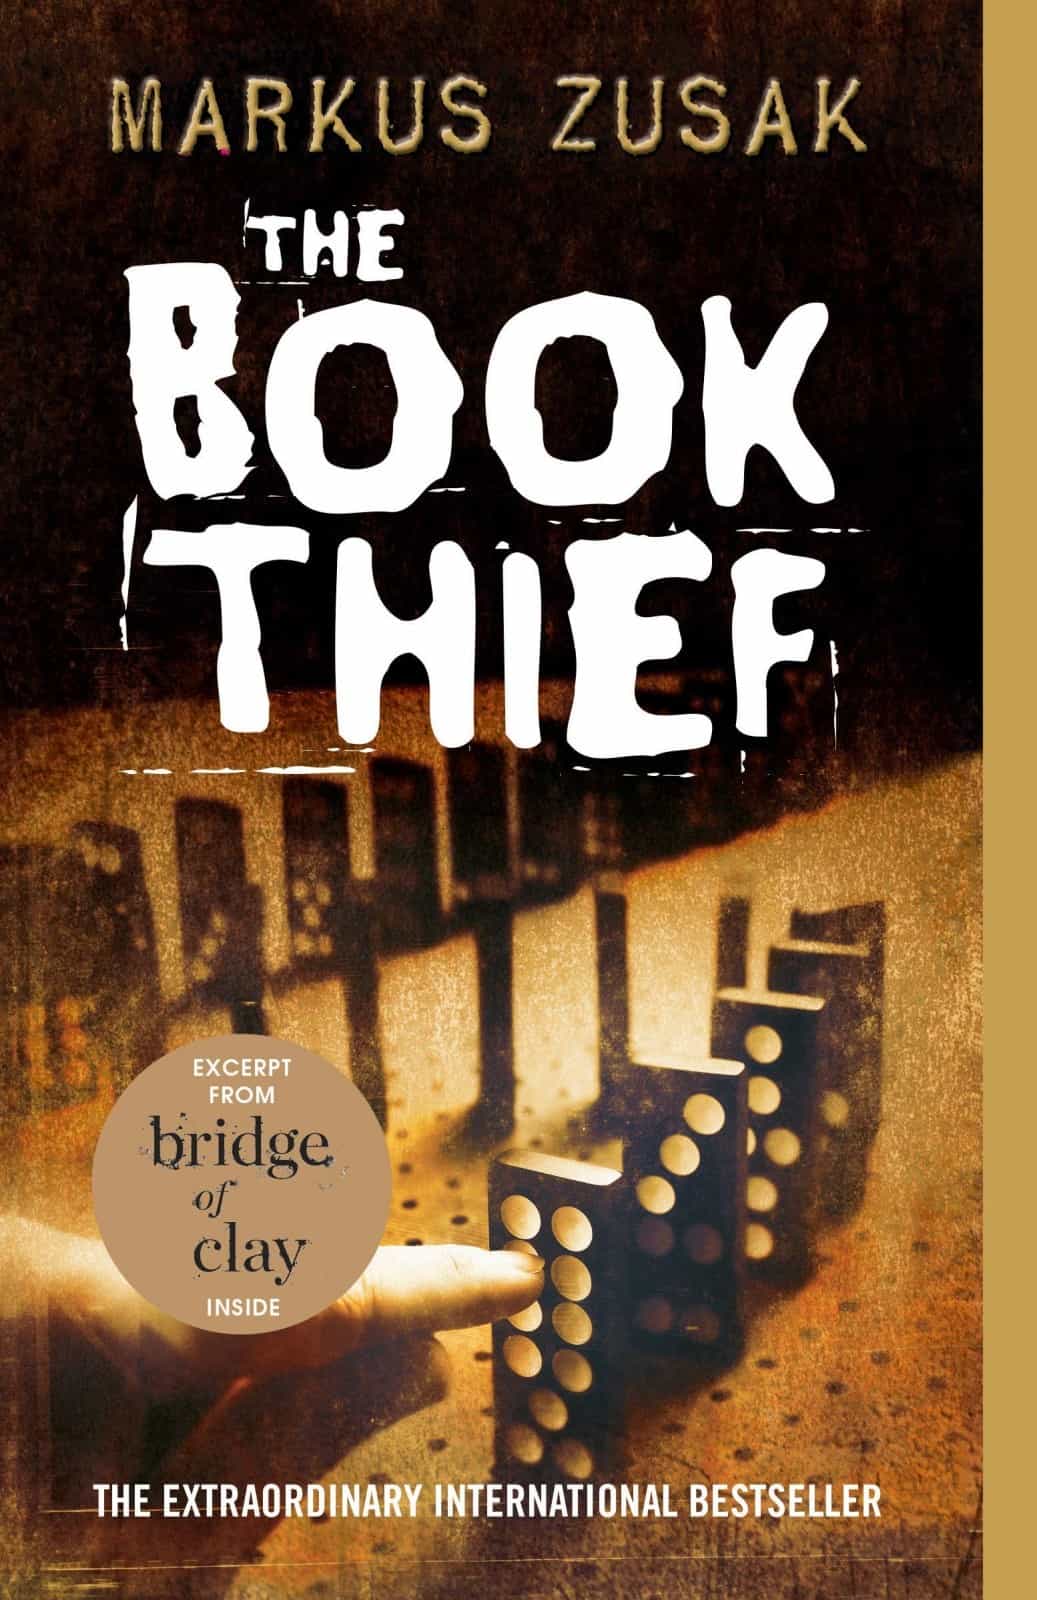 <ul> <li><strong>Runtime:</strong> 13 hours, 56 minutes</li>    <li><strong>Author:</strong> Markus Zusak</li>    <li><strong>Narrator:</strong> Allan Corduner</li> </ul>    <p><em>The Book Thief</em> by Markus Zusak is a heart-wrenching and beautifully written novel set during World War II. Since its publication in 2006, readers have been moved by the book's timeless exploration of love, loss, and the true power of words. Listening to <em>The Book Thief</em> as an audiobook, the story takes on a deeper meaning through the unique perspective of Death heard out loud. Featuring Allan Corduner as the narrator, Zusak's book manages to hit even harder than before. Even if you've read it before, it's worth going through again as an audiobook.</p>